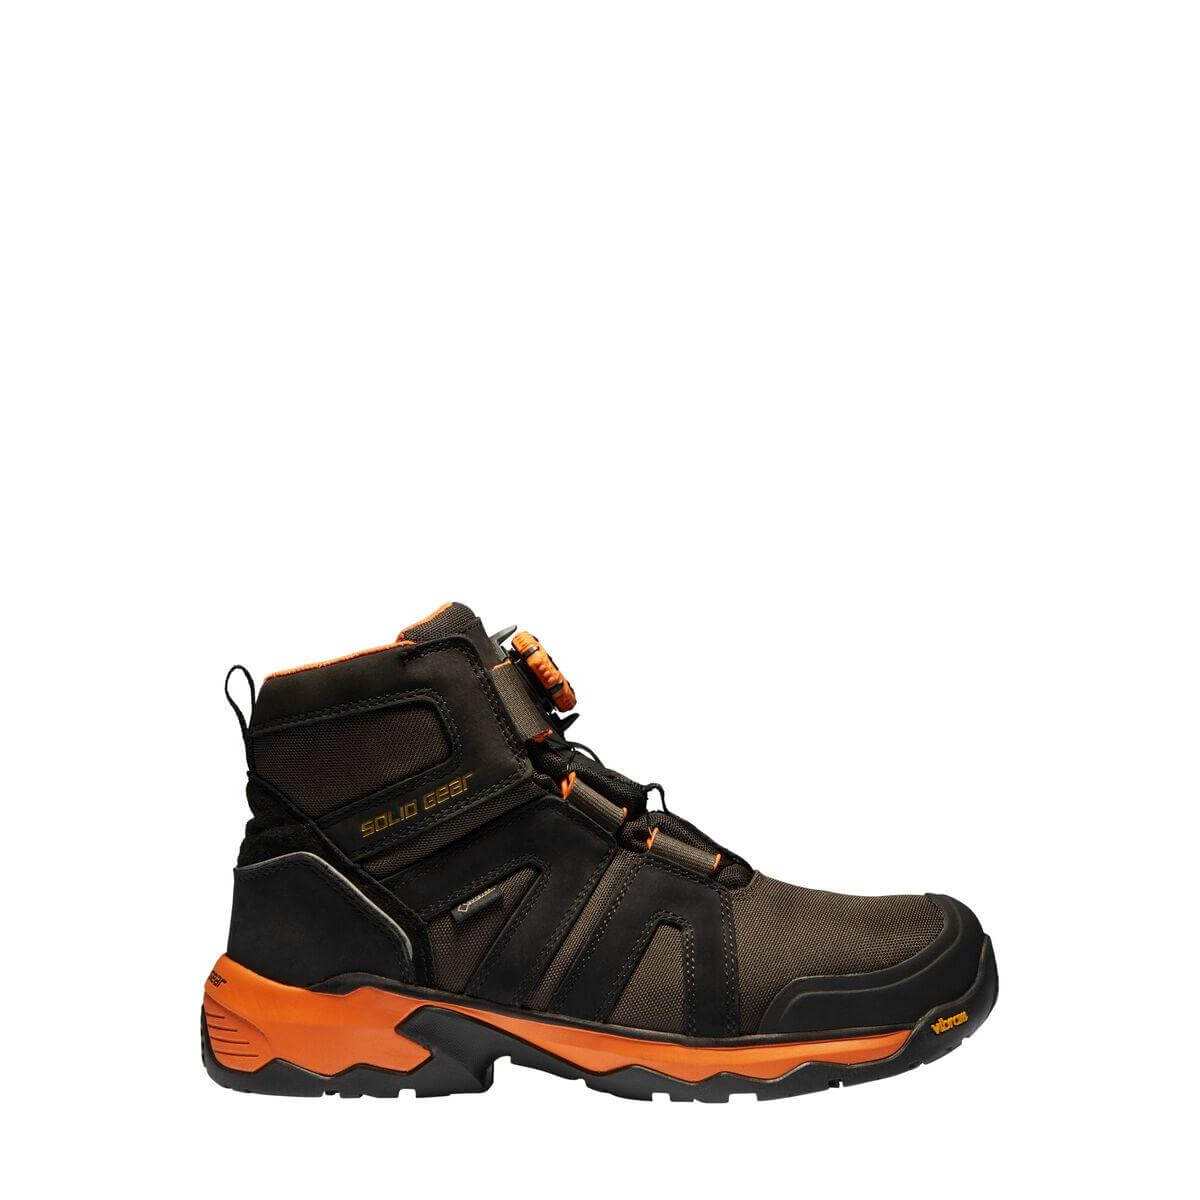 Solid Gear by Snickers 81002 Tigris GTX AG Mid Cut Wide Fit Gore Tex Waterproof S3 BOA Composite Toe Cap Safety Boots Black Orange 01 #colour_black-orange